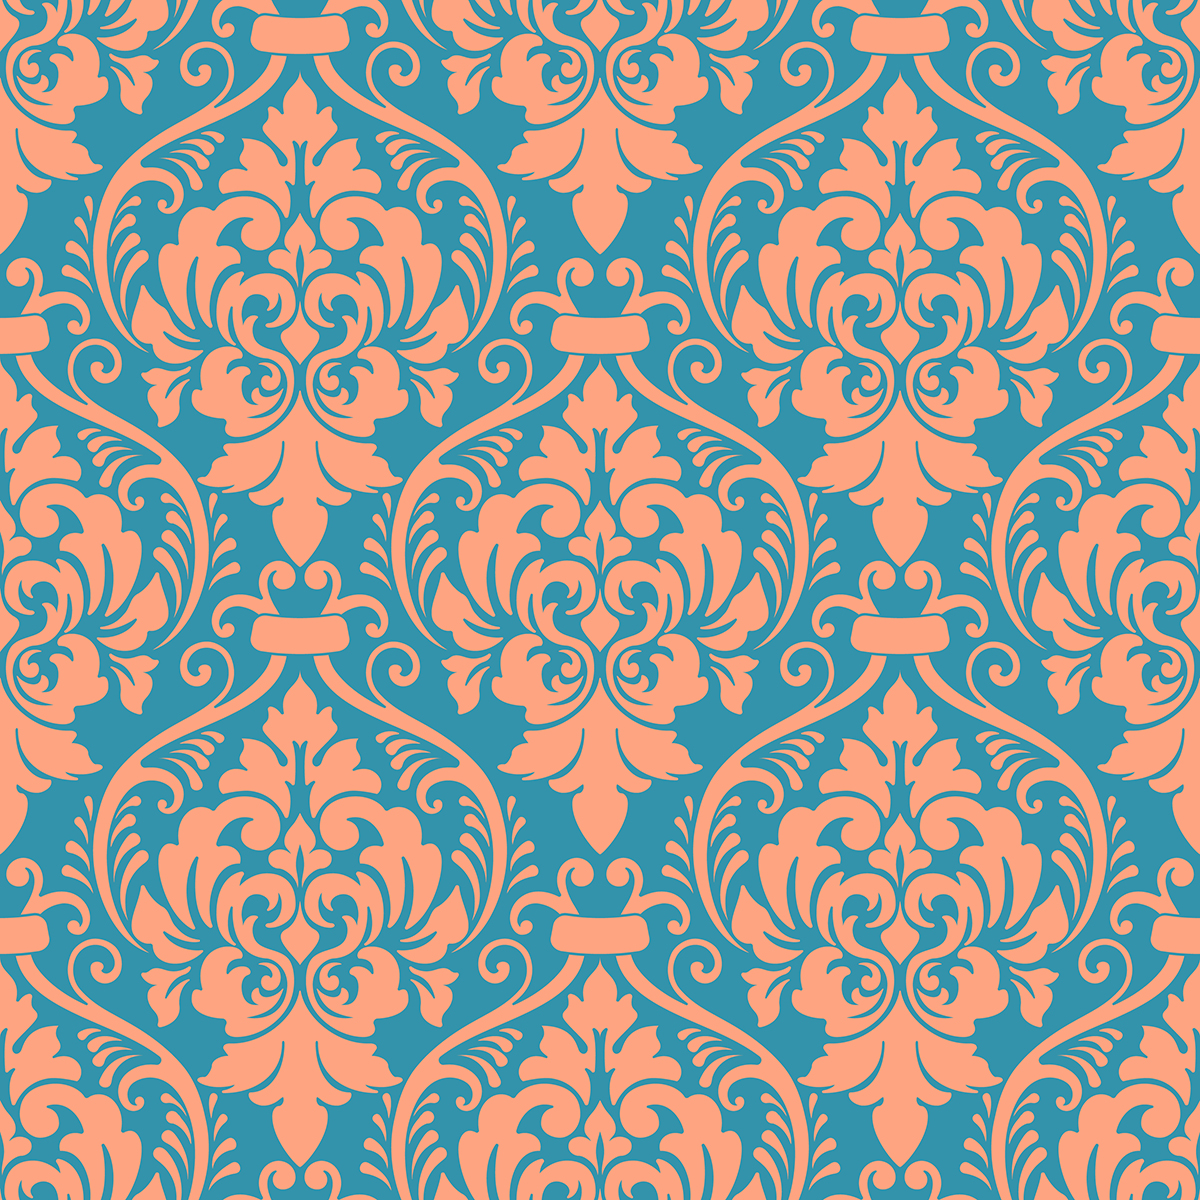 A pattern of orange and blue designs